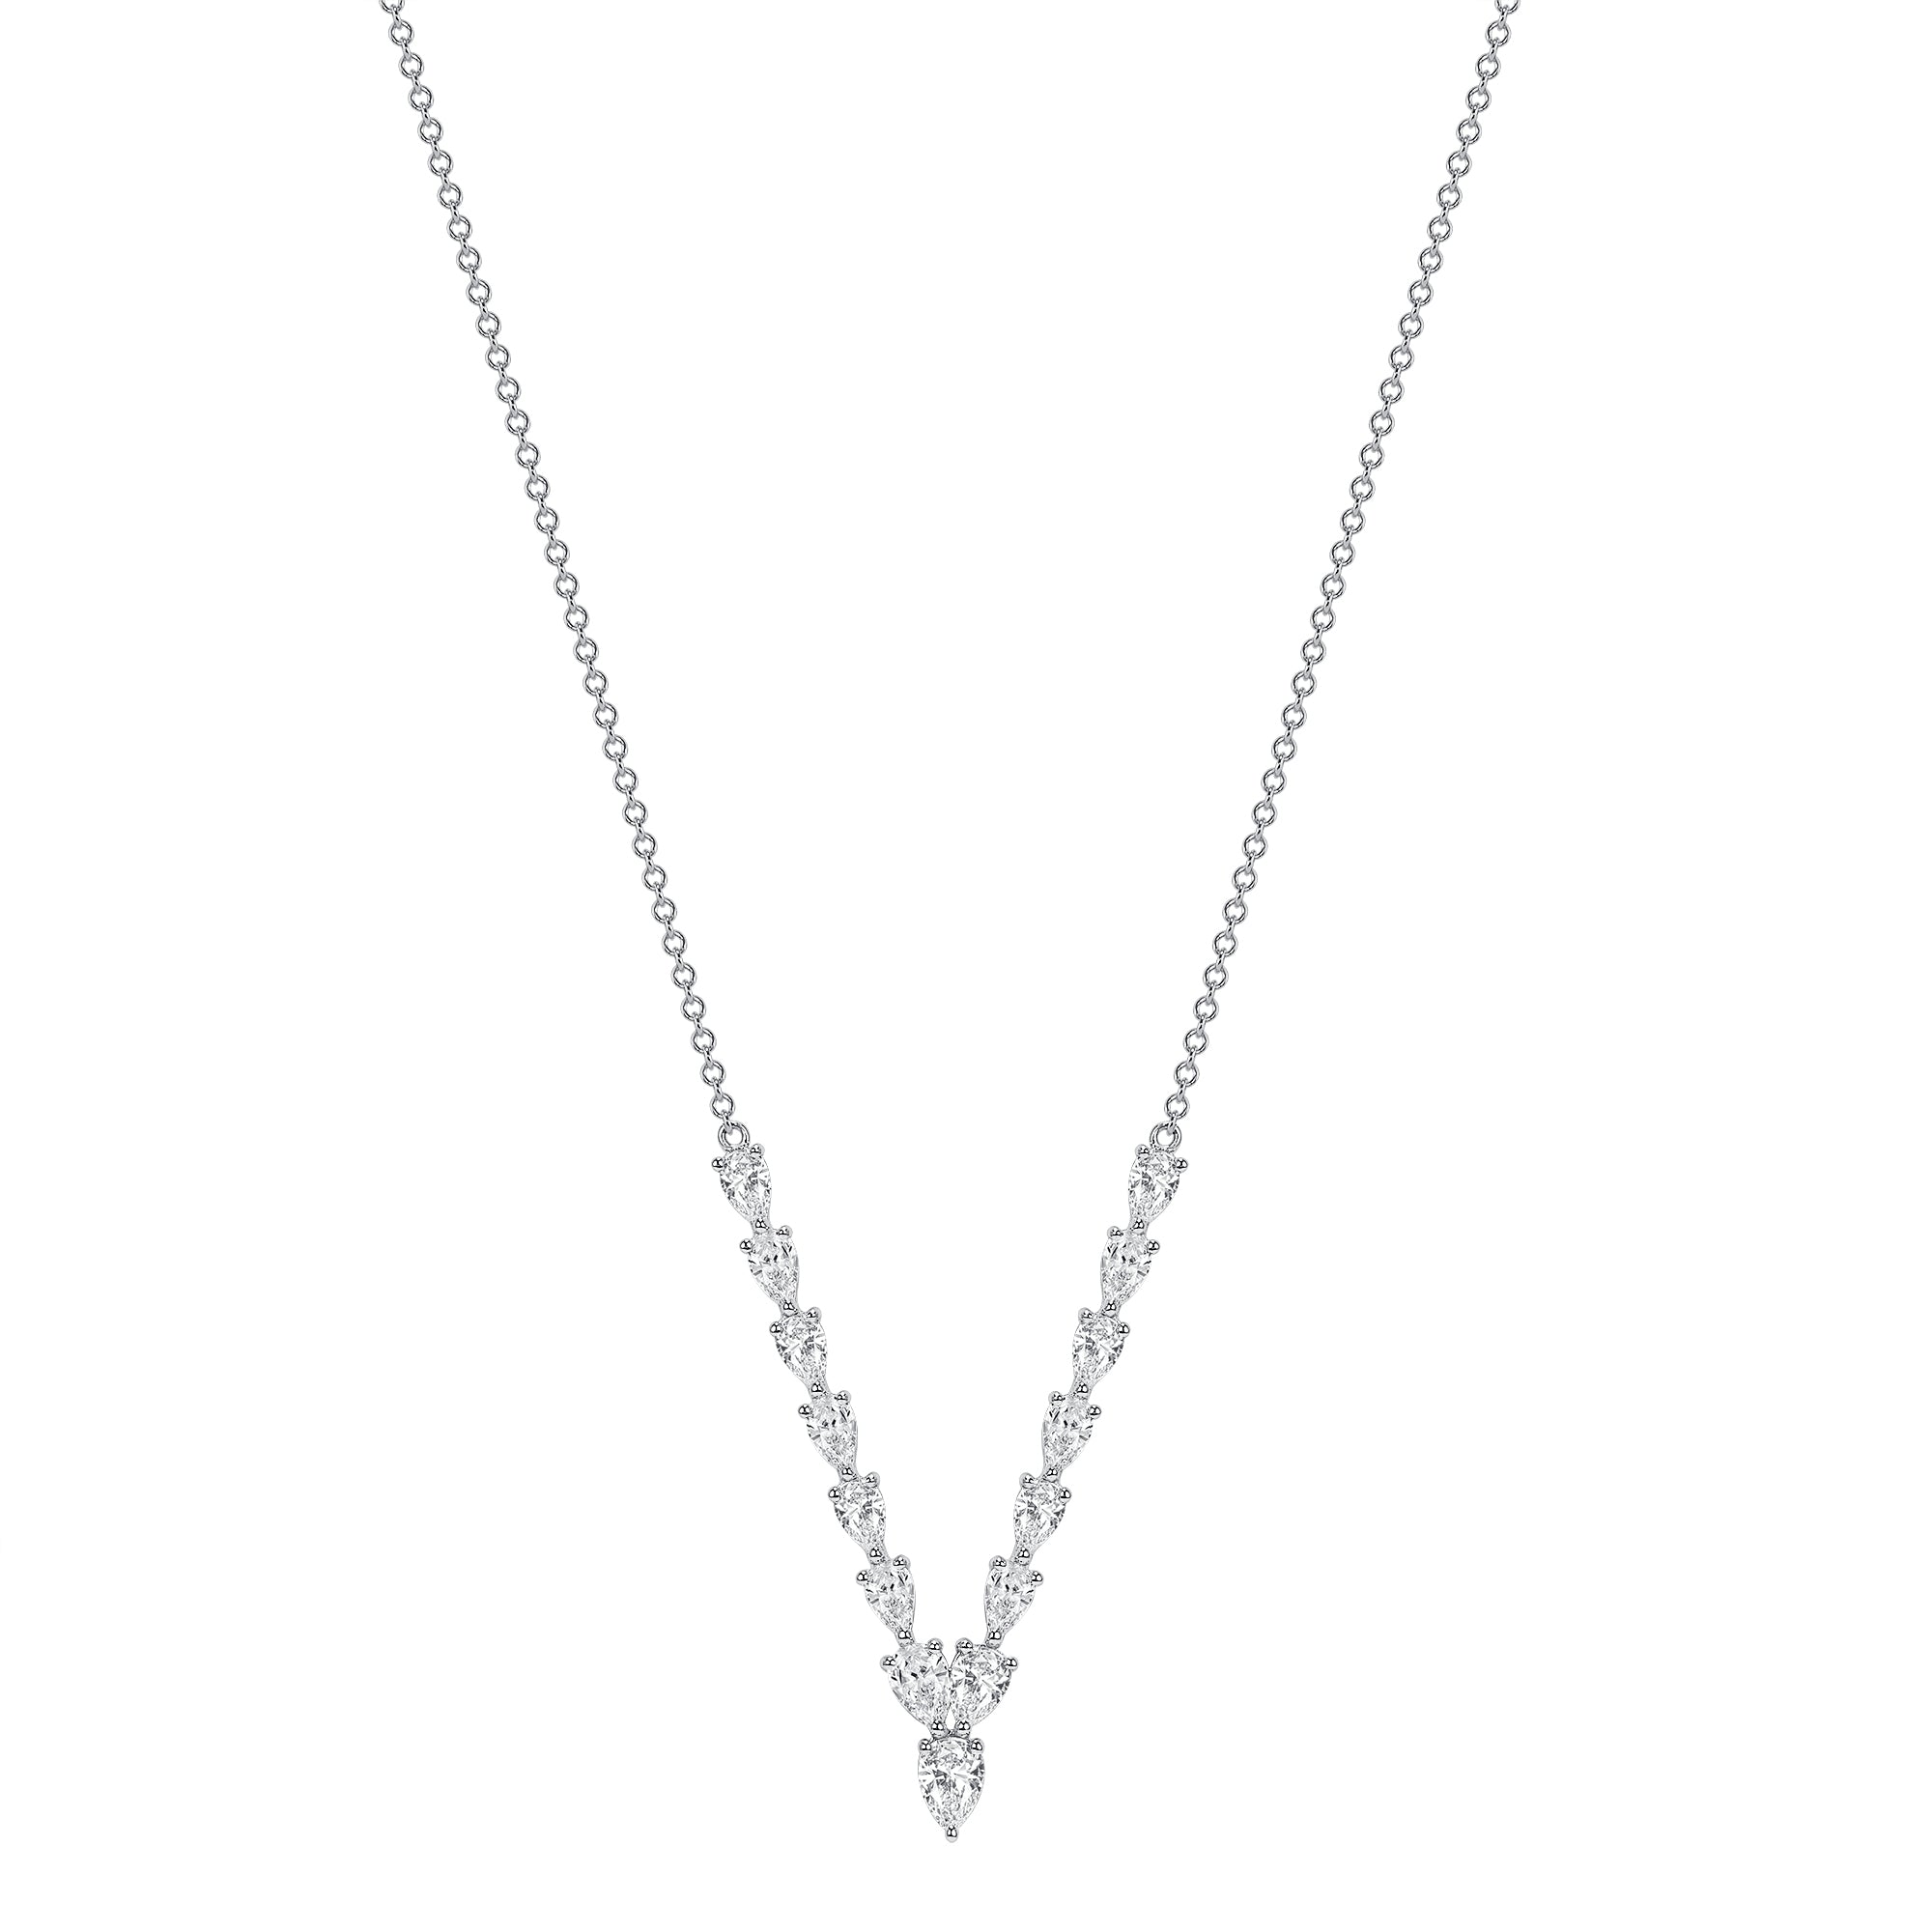 1.42ct. Floating V Pear Shape Diamond Necklace in 18K White Gold